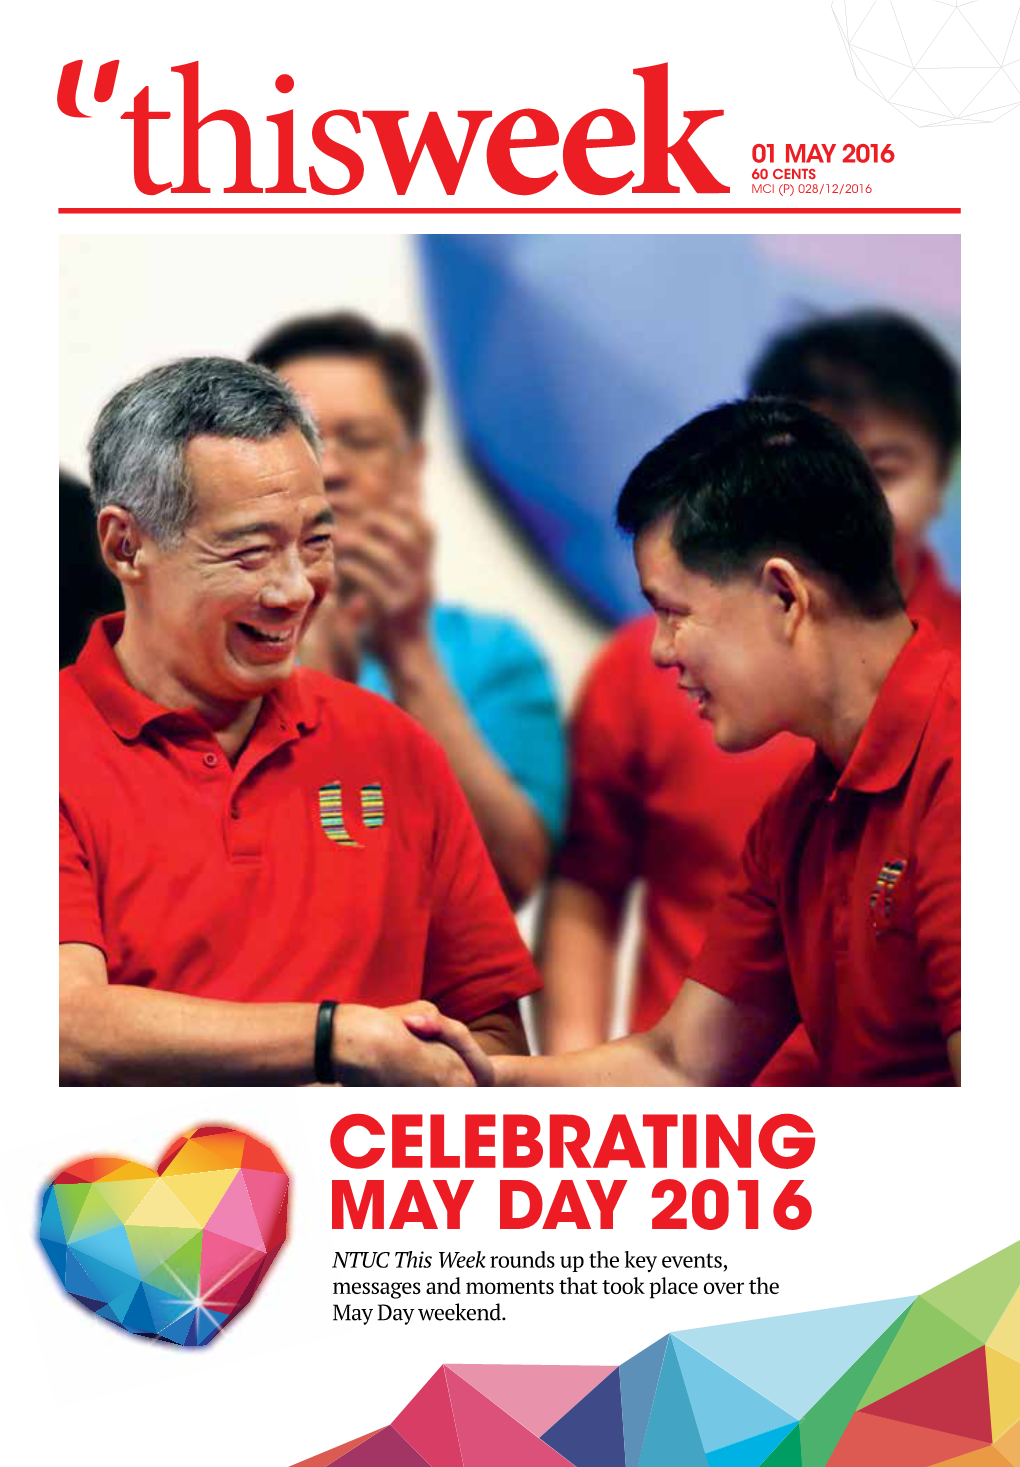 CELEBRATING MAY DAY 2016 NTUC This Week Rounds up the Key Events, Messages and Moments That Took Place Over the May Day Weekend